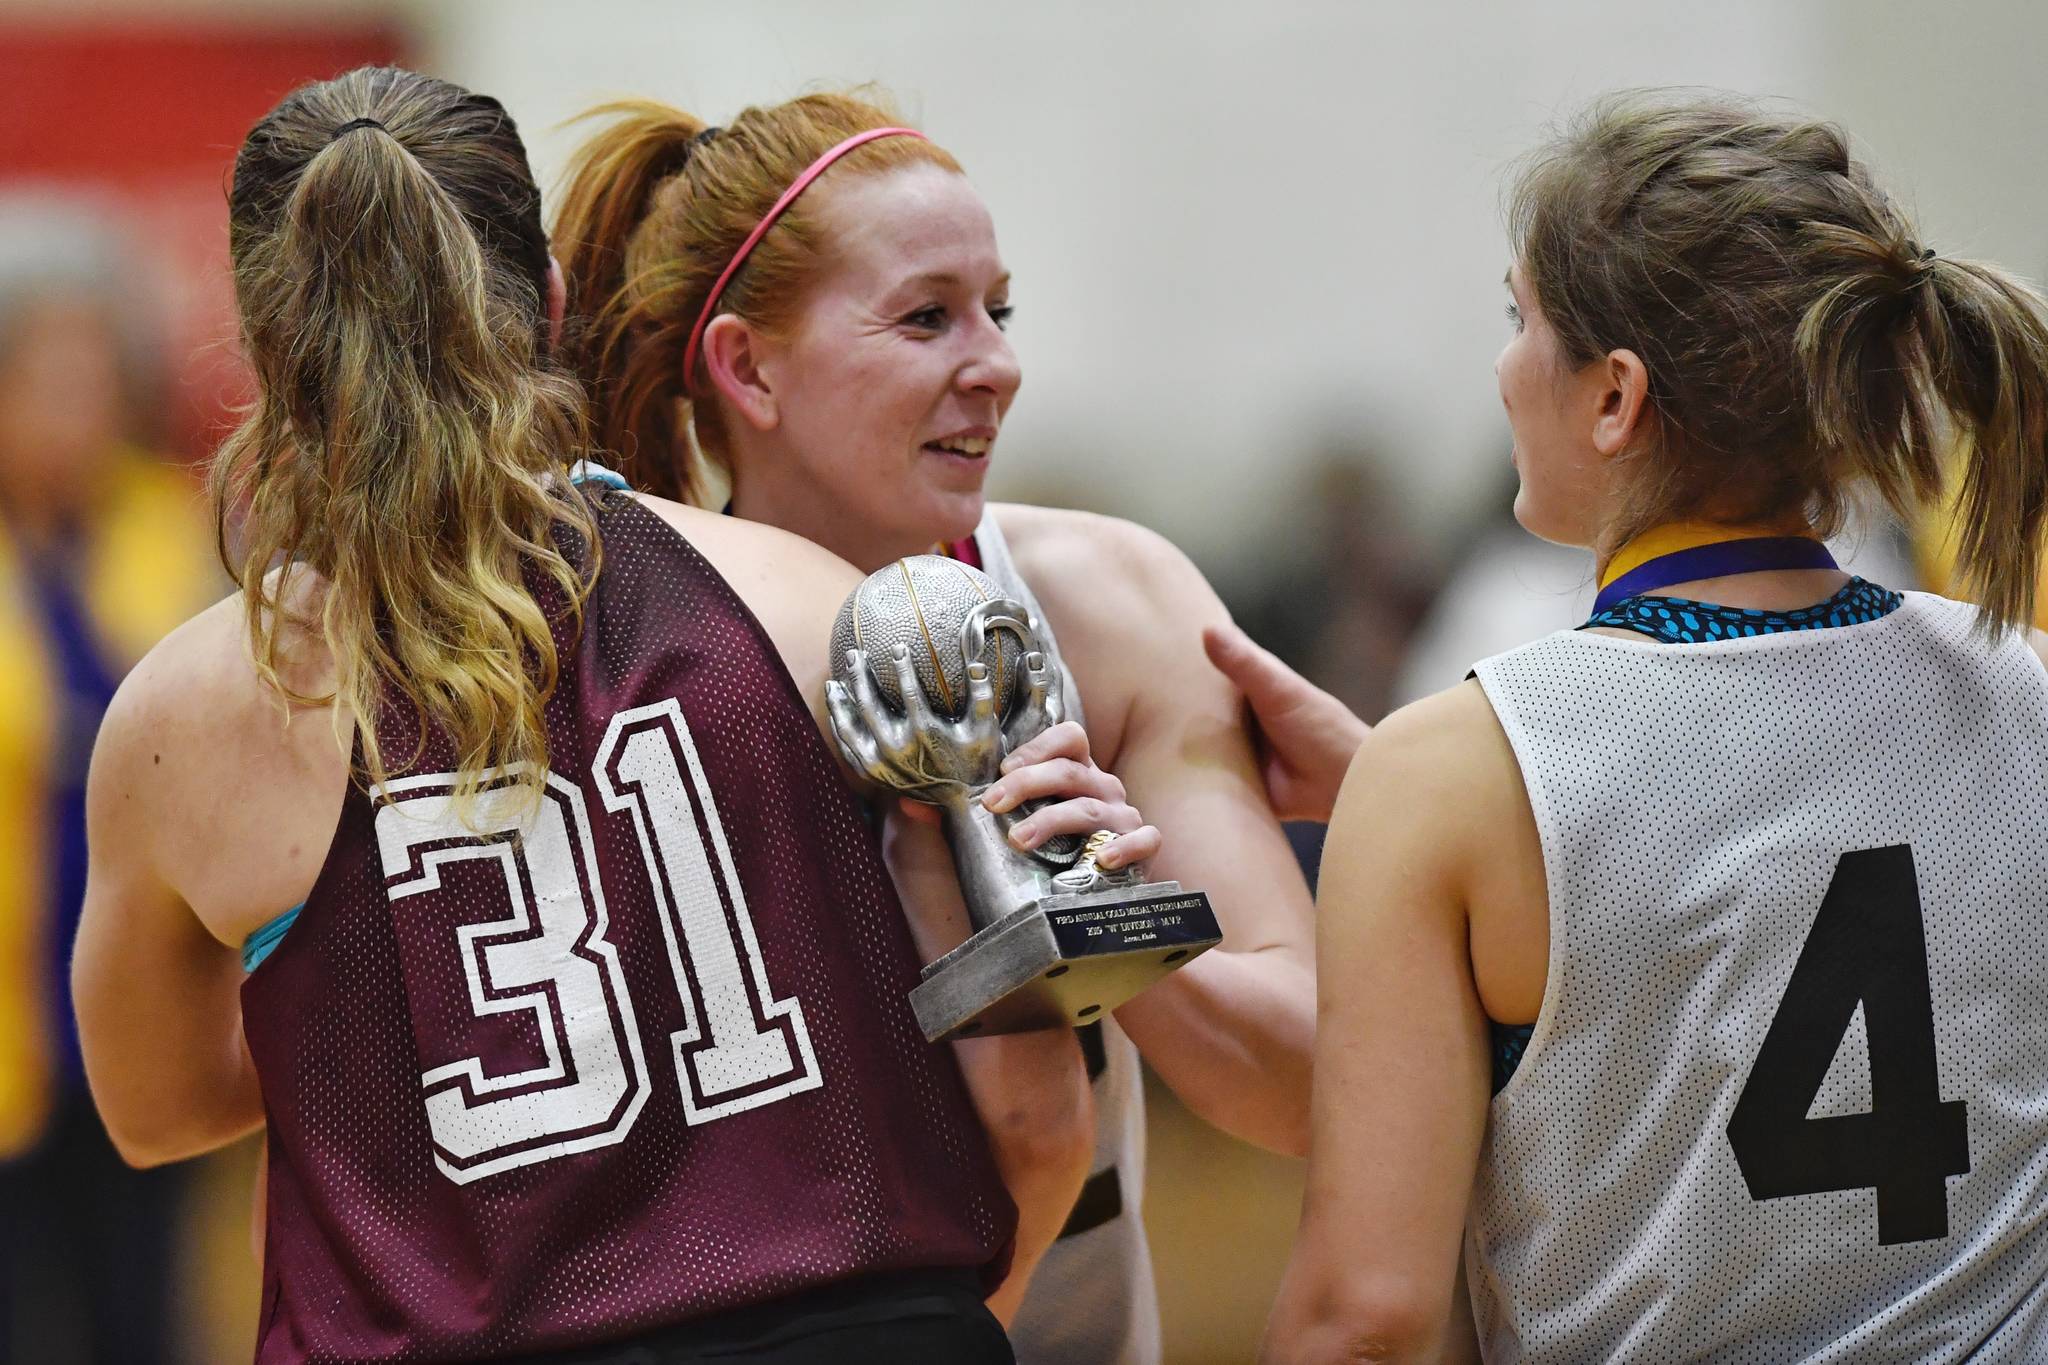 Skagway’s Jesse Ellis, center, receives congratulations from teammate Kaitlyn Jerod, right, and Haines’ Rachel Brittenham after receiving the MVP award in the women’s final at the Gold Medal Basketball Tournament on Saturday, March 23, 2019. (Michael Penn | Juneau Empire)